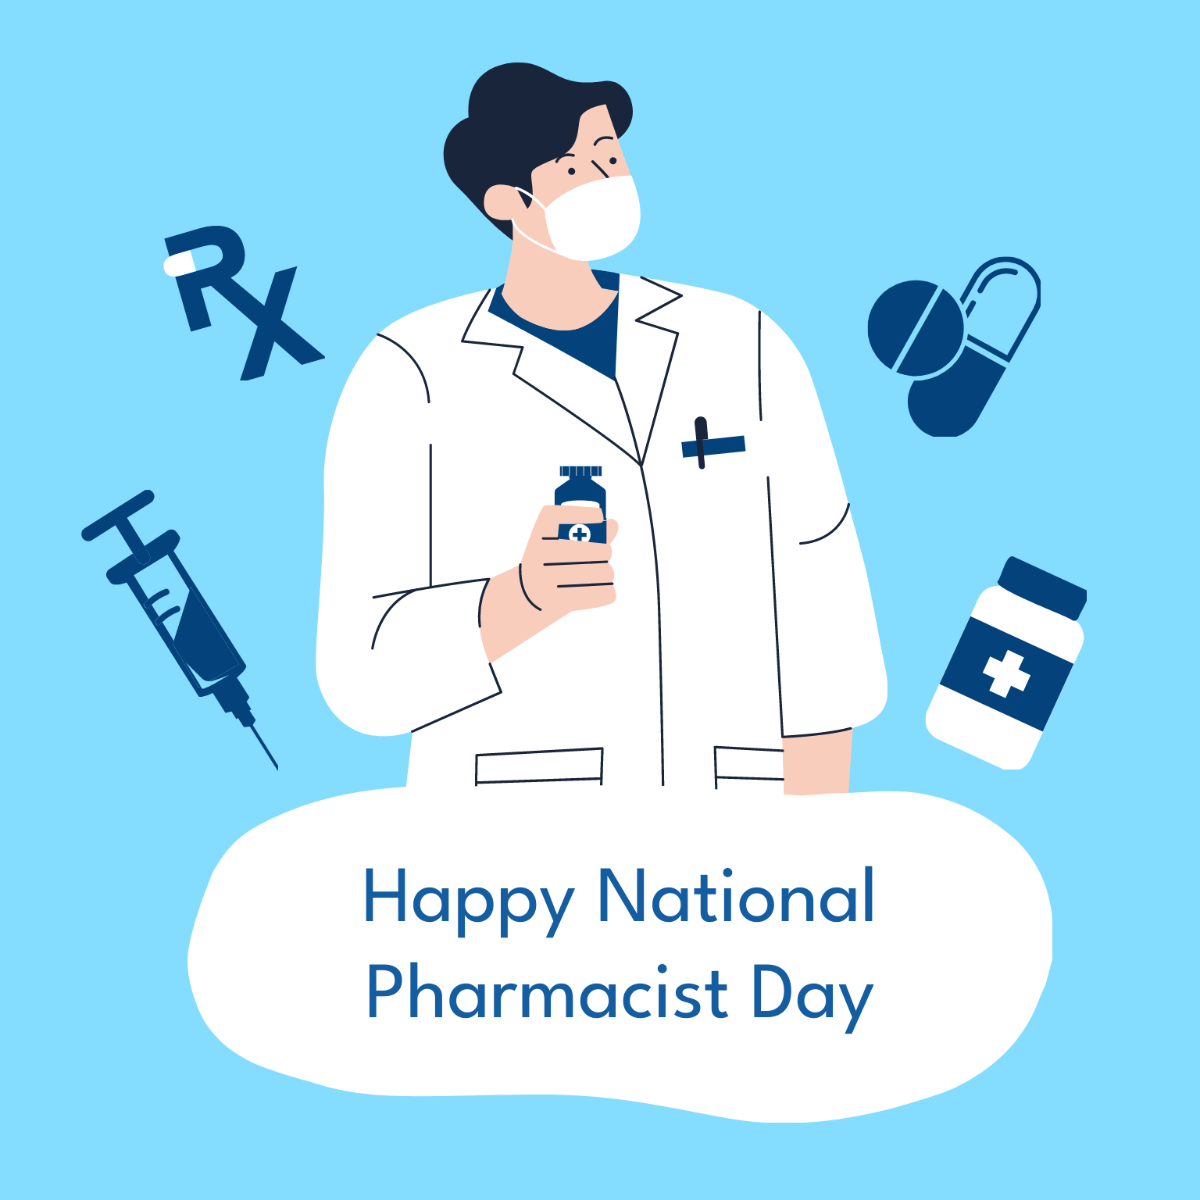 Happy National Pharmacist Day Illustration Template